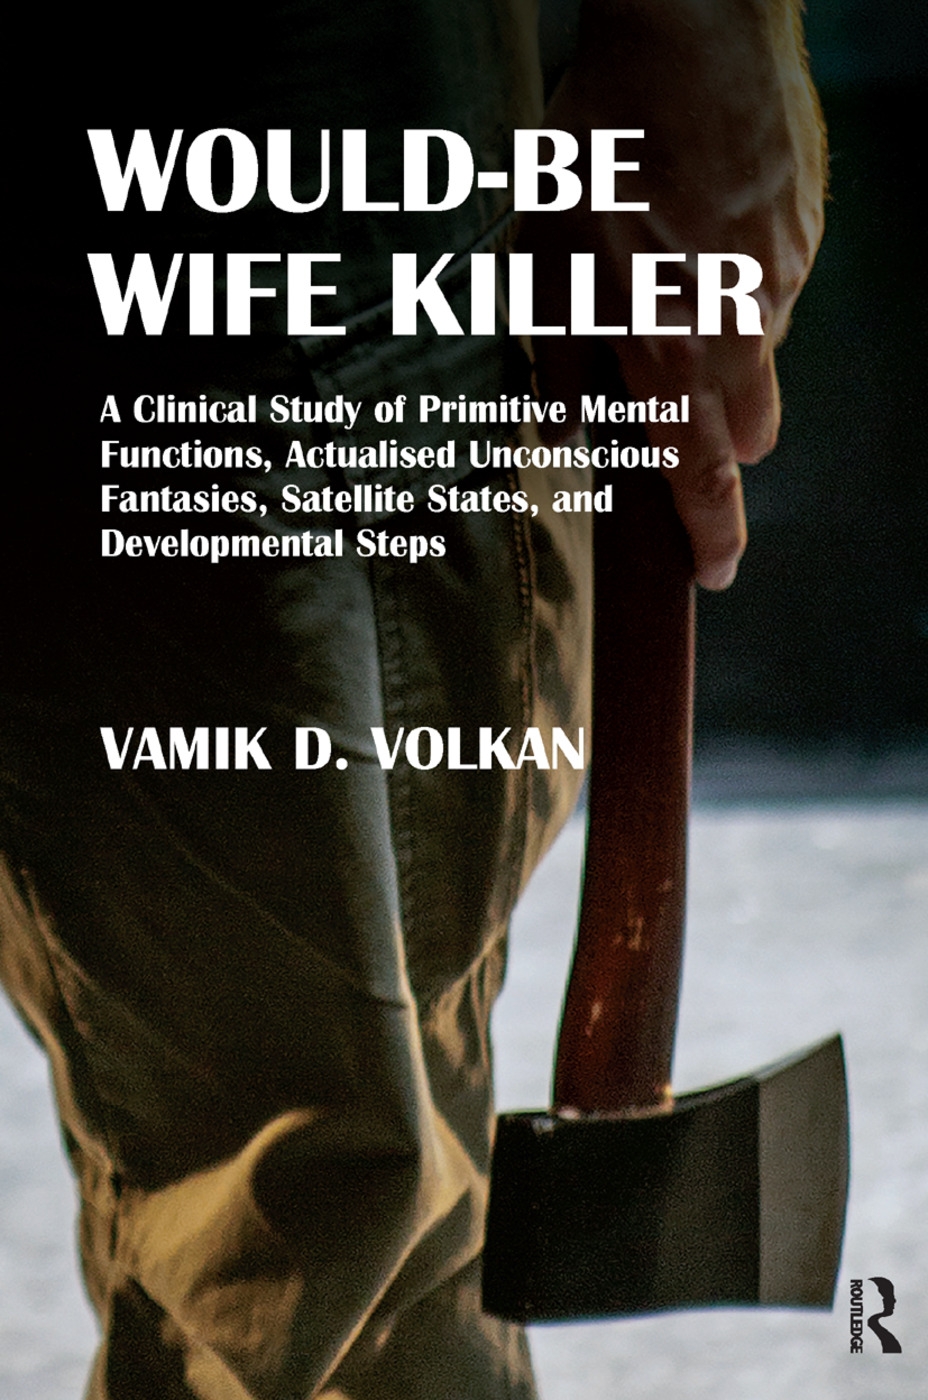 Would-be Wife Killer: A Clinical Study of Primitive Mental Functions, Actualised Unconscious Fantasies, Satellite States, and De